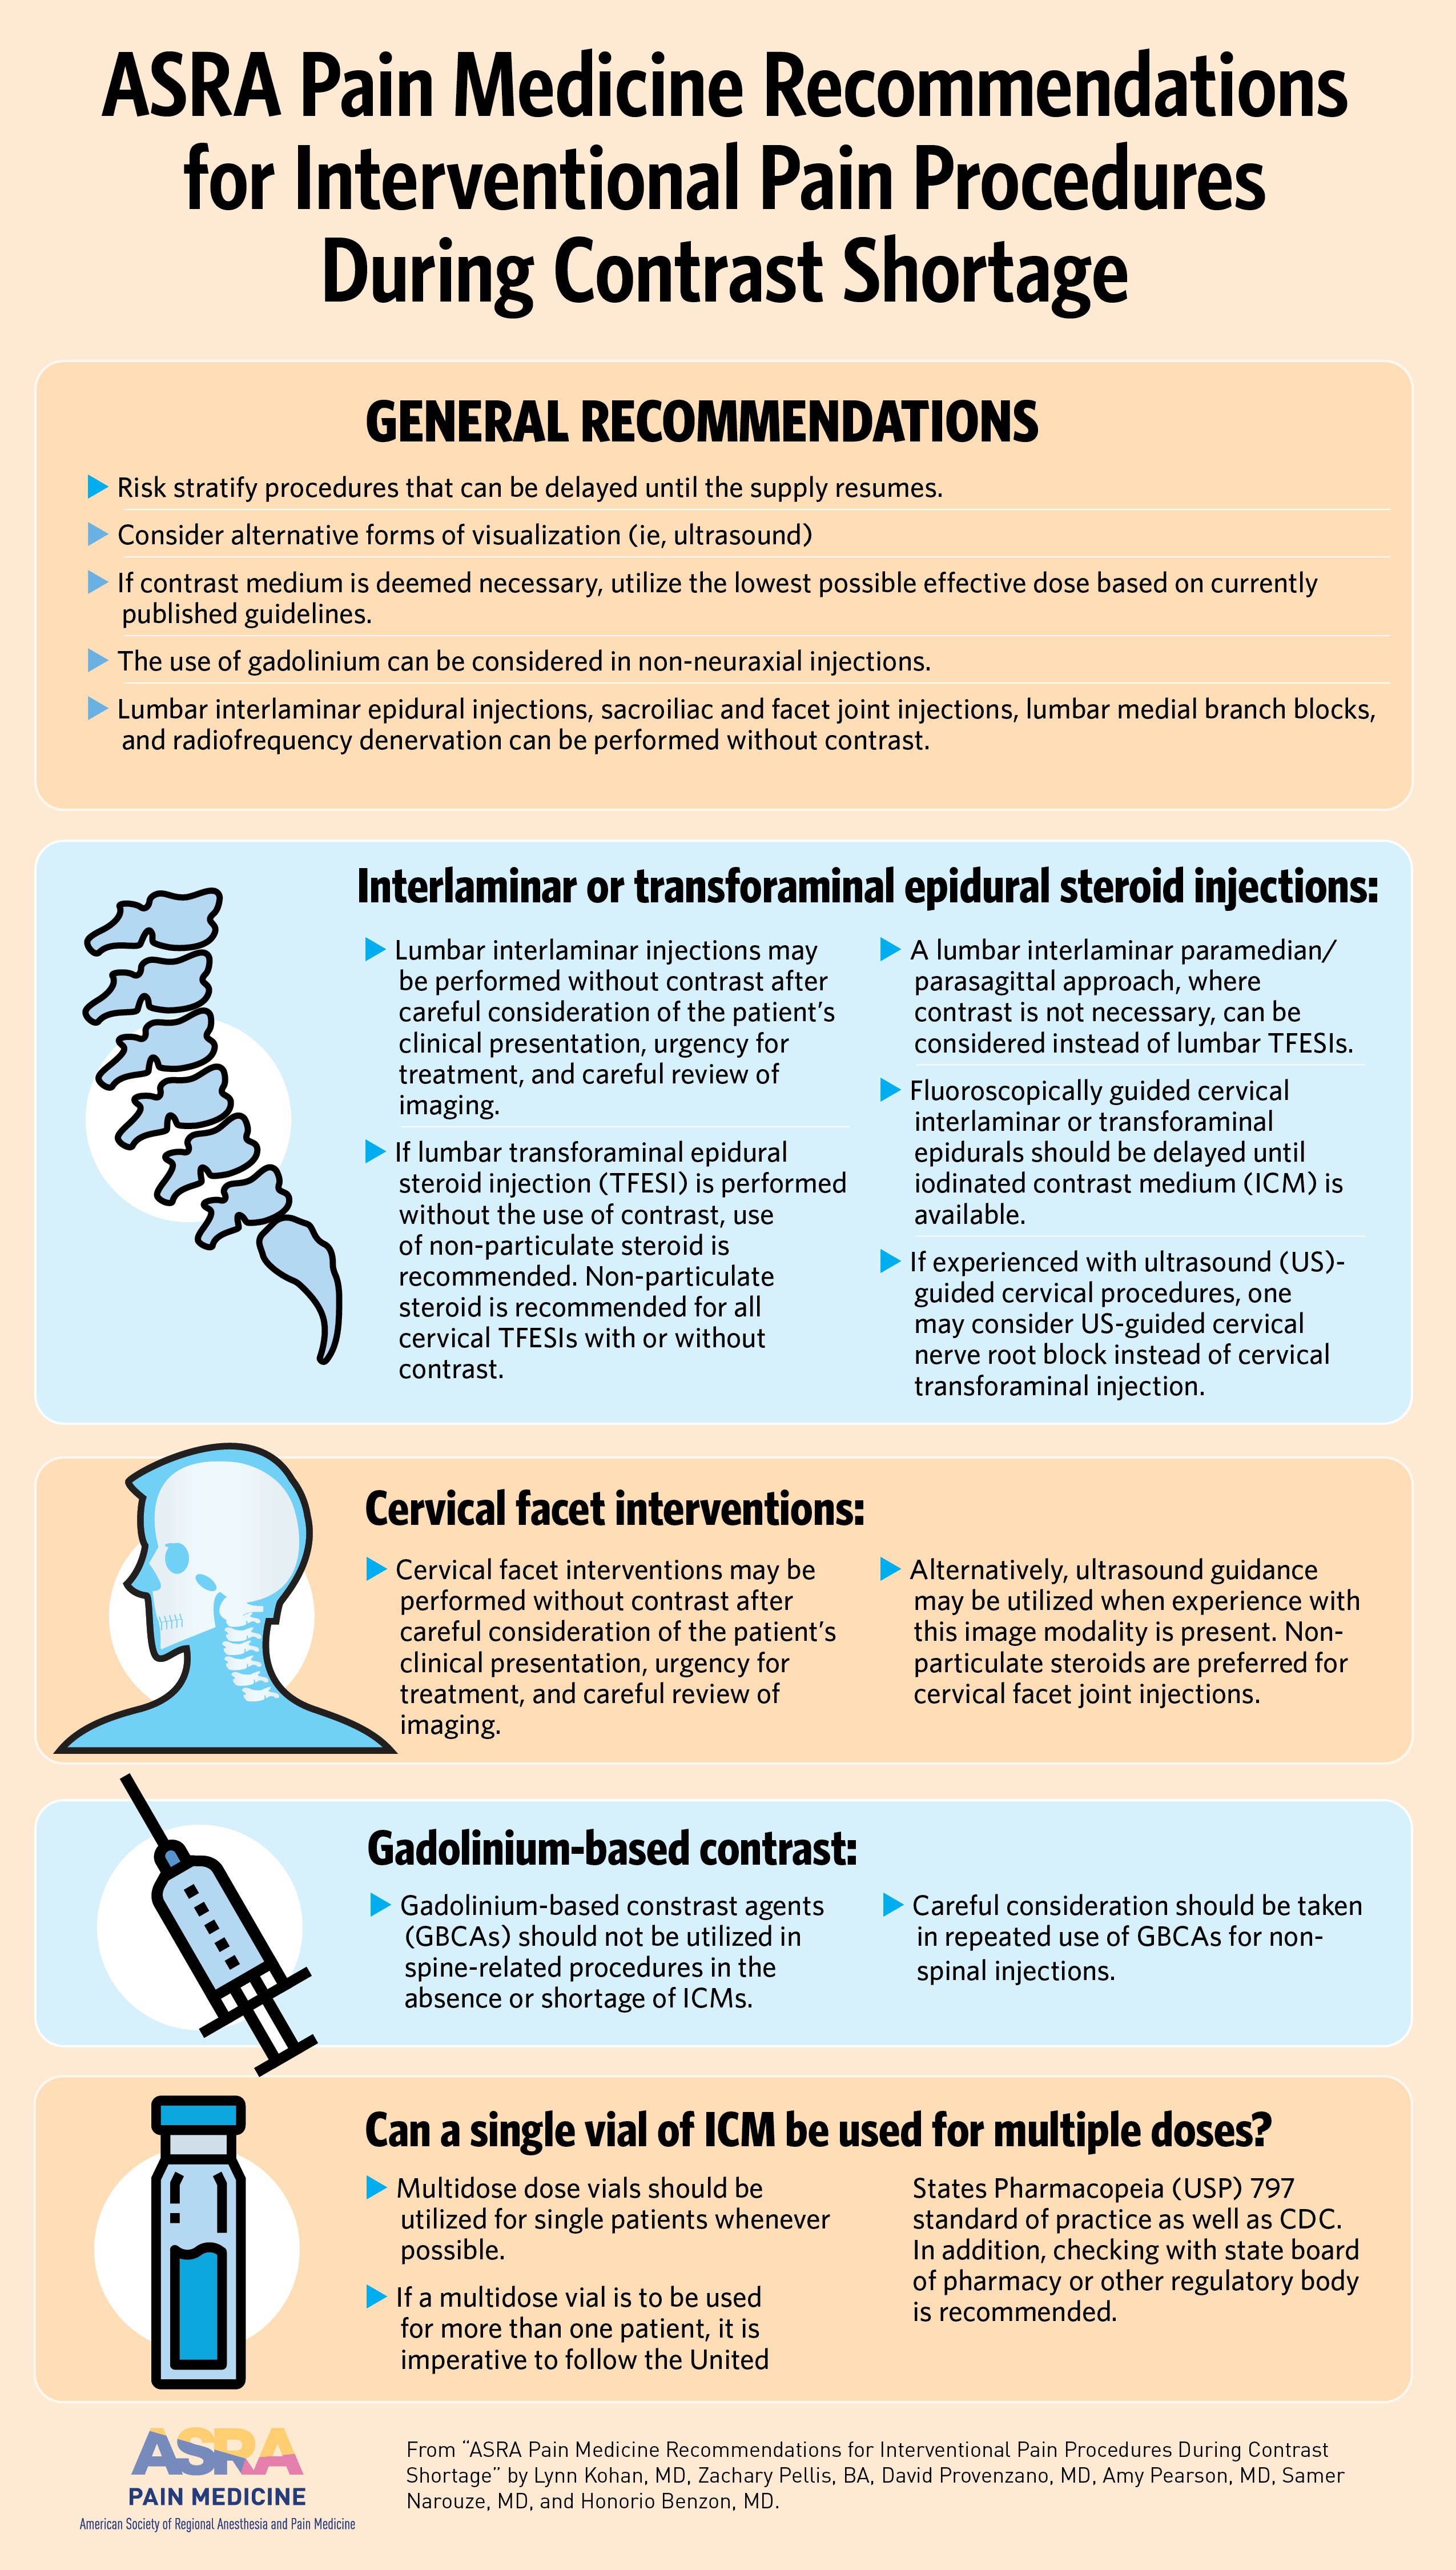 ASRA Pain Medicine Recommendations for Interventional Pain Procedures During Contrast Shortage (Infographic)